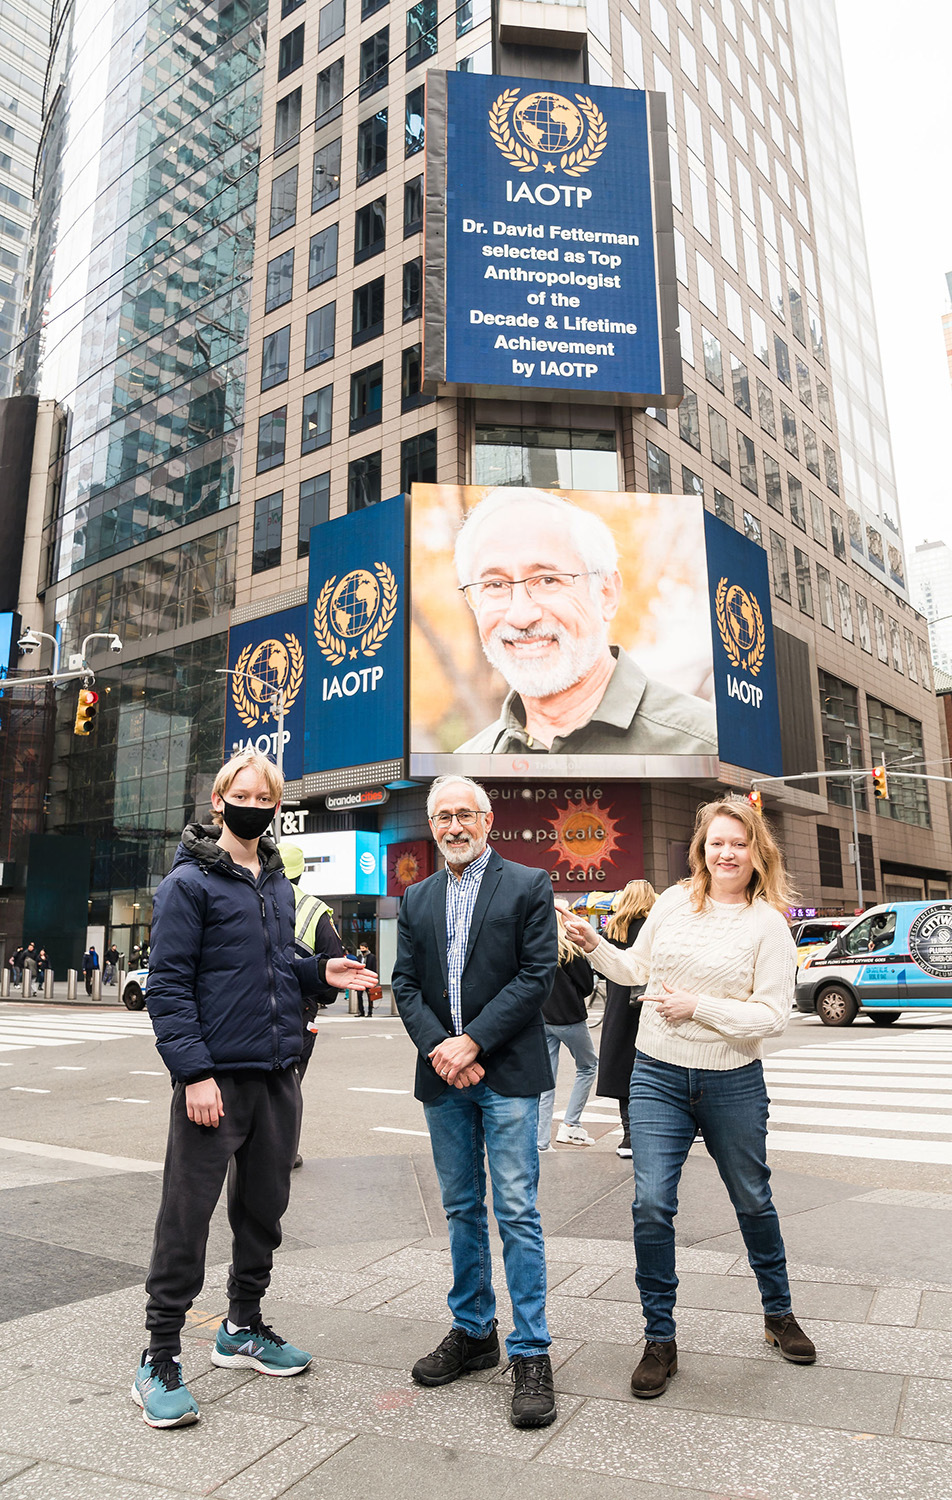 David Fetterman ’76 (CLAS) celebrated his award for Anthropologist of the Decade and Lifetime Achievement from the International Association of Top Professionals in Times Square, New York City, with his family.